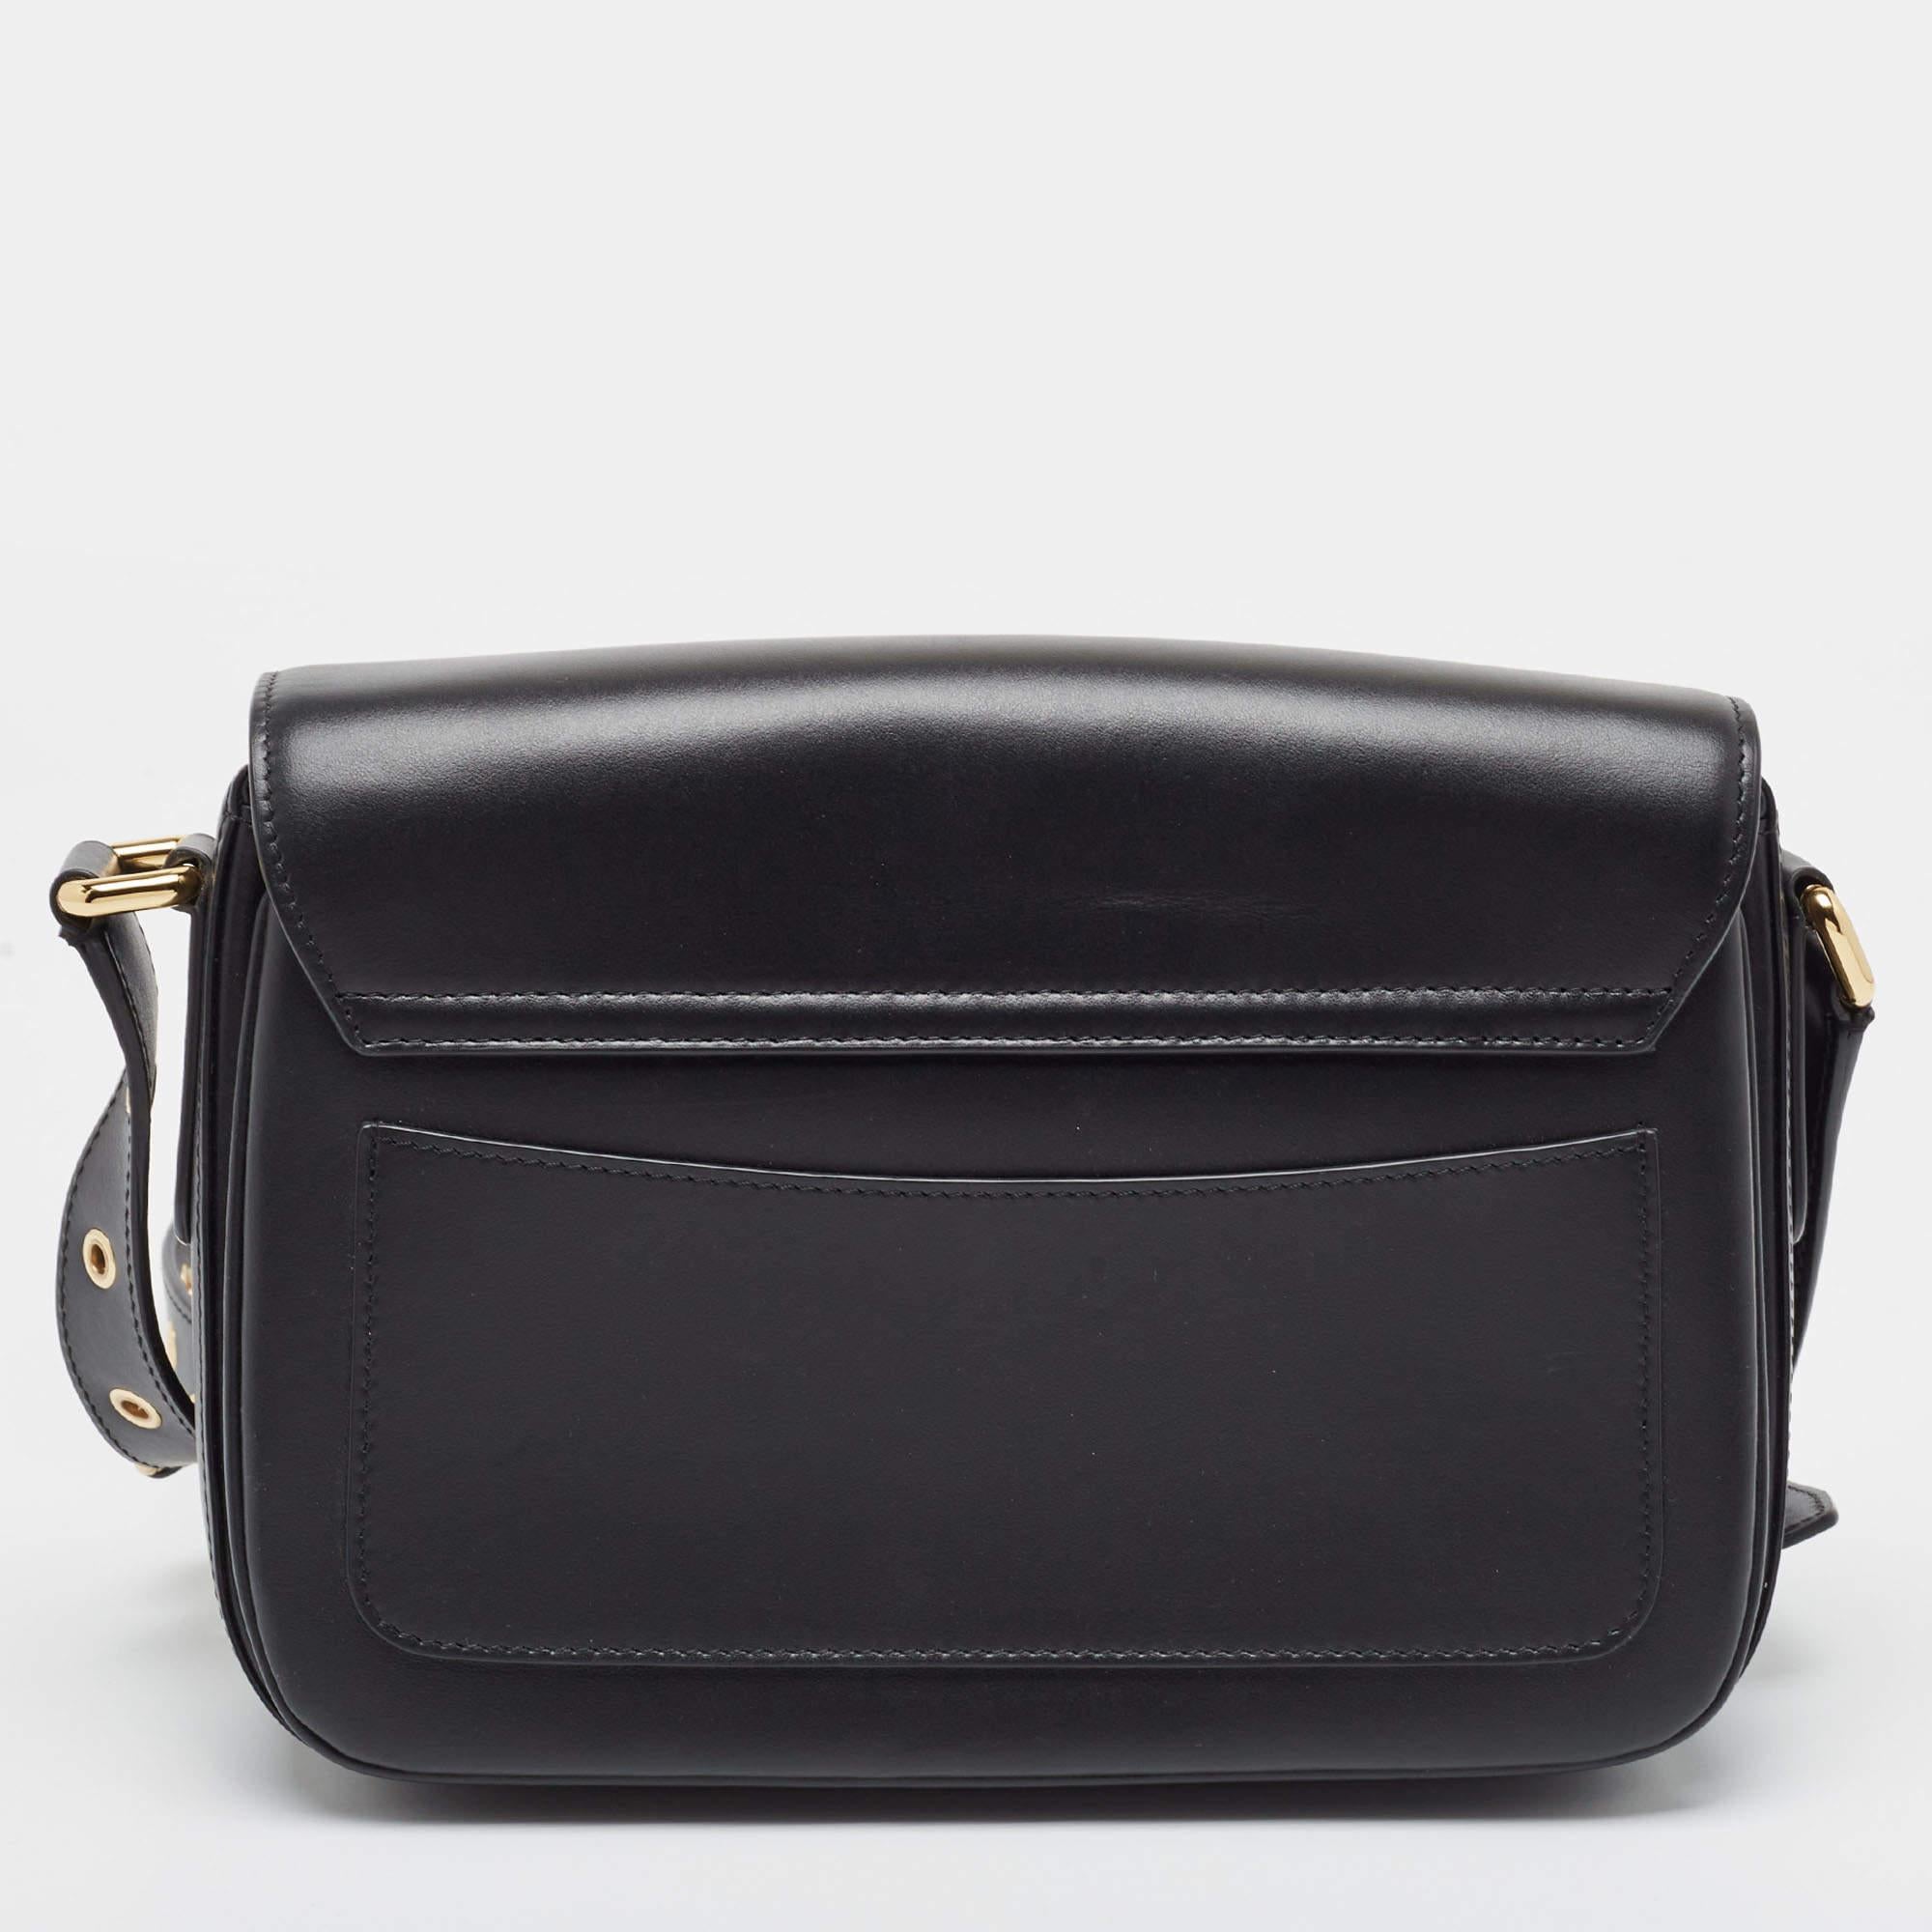 For days when you need just essentials, carry this DG Millennials shoulder bag. It is finely crafted from leather in a compact silhouette and added with a DG logo on the flap.

Includes: Original Dustbag

